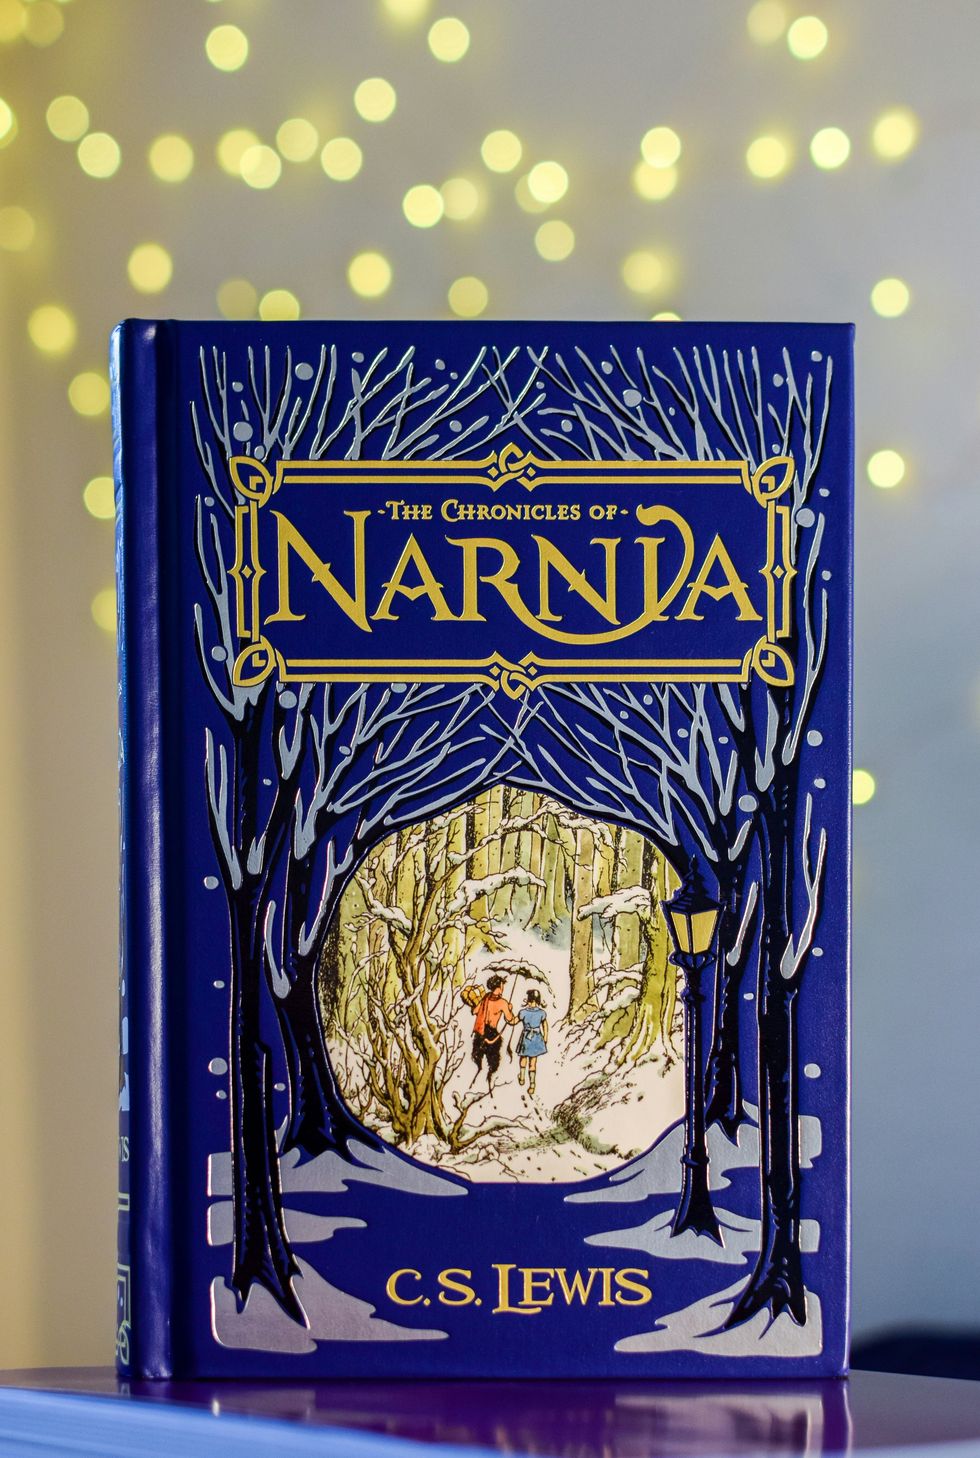 chronicles of narnia book